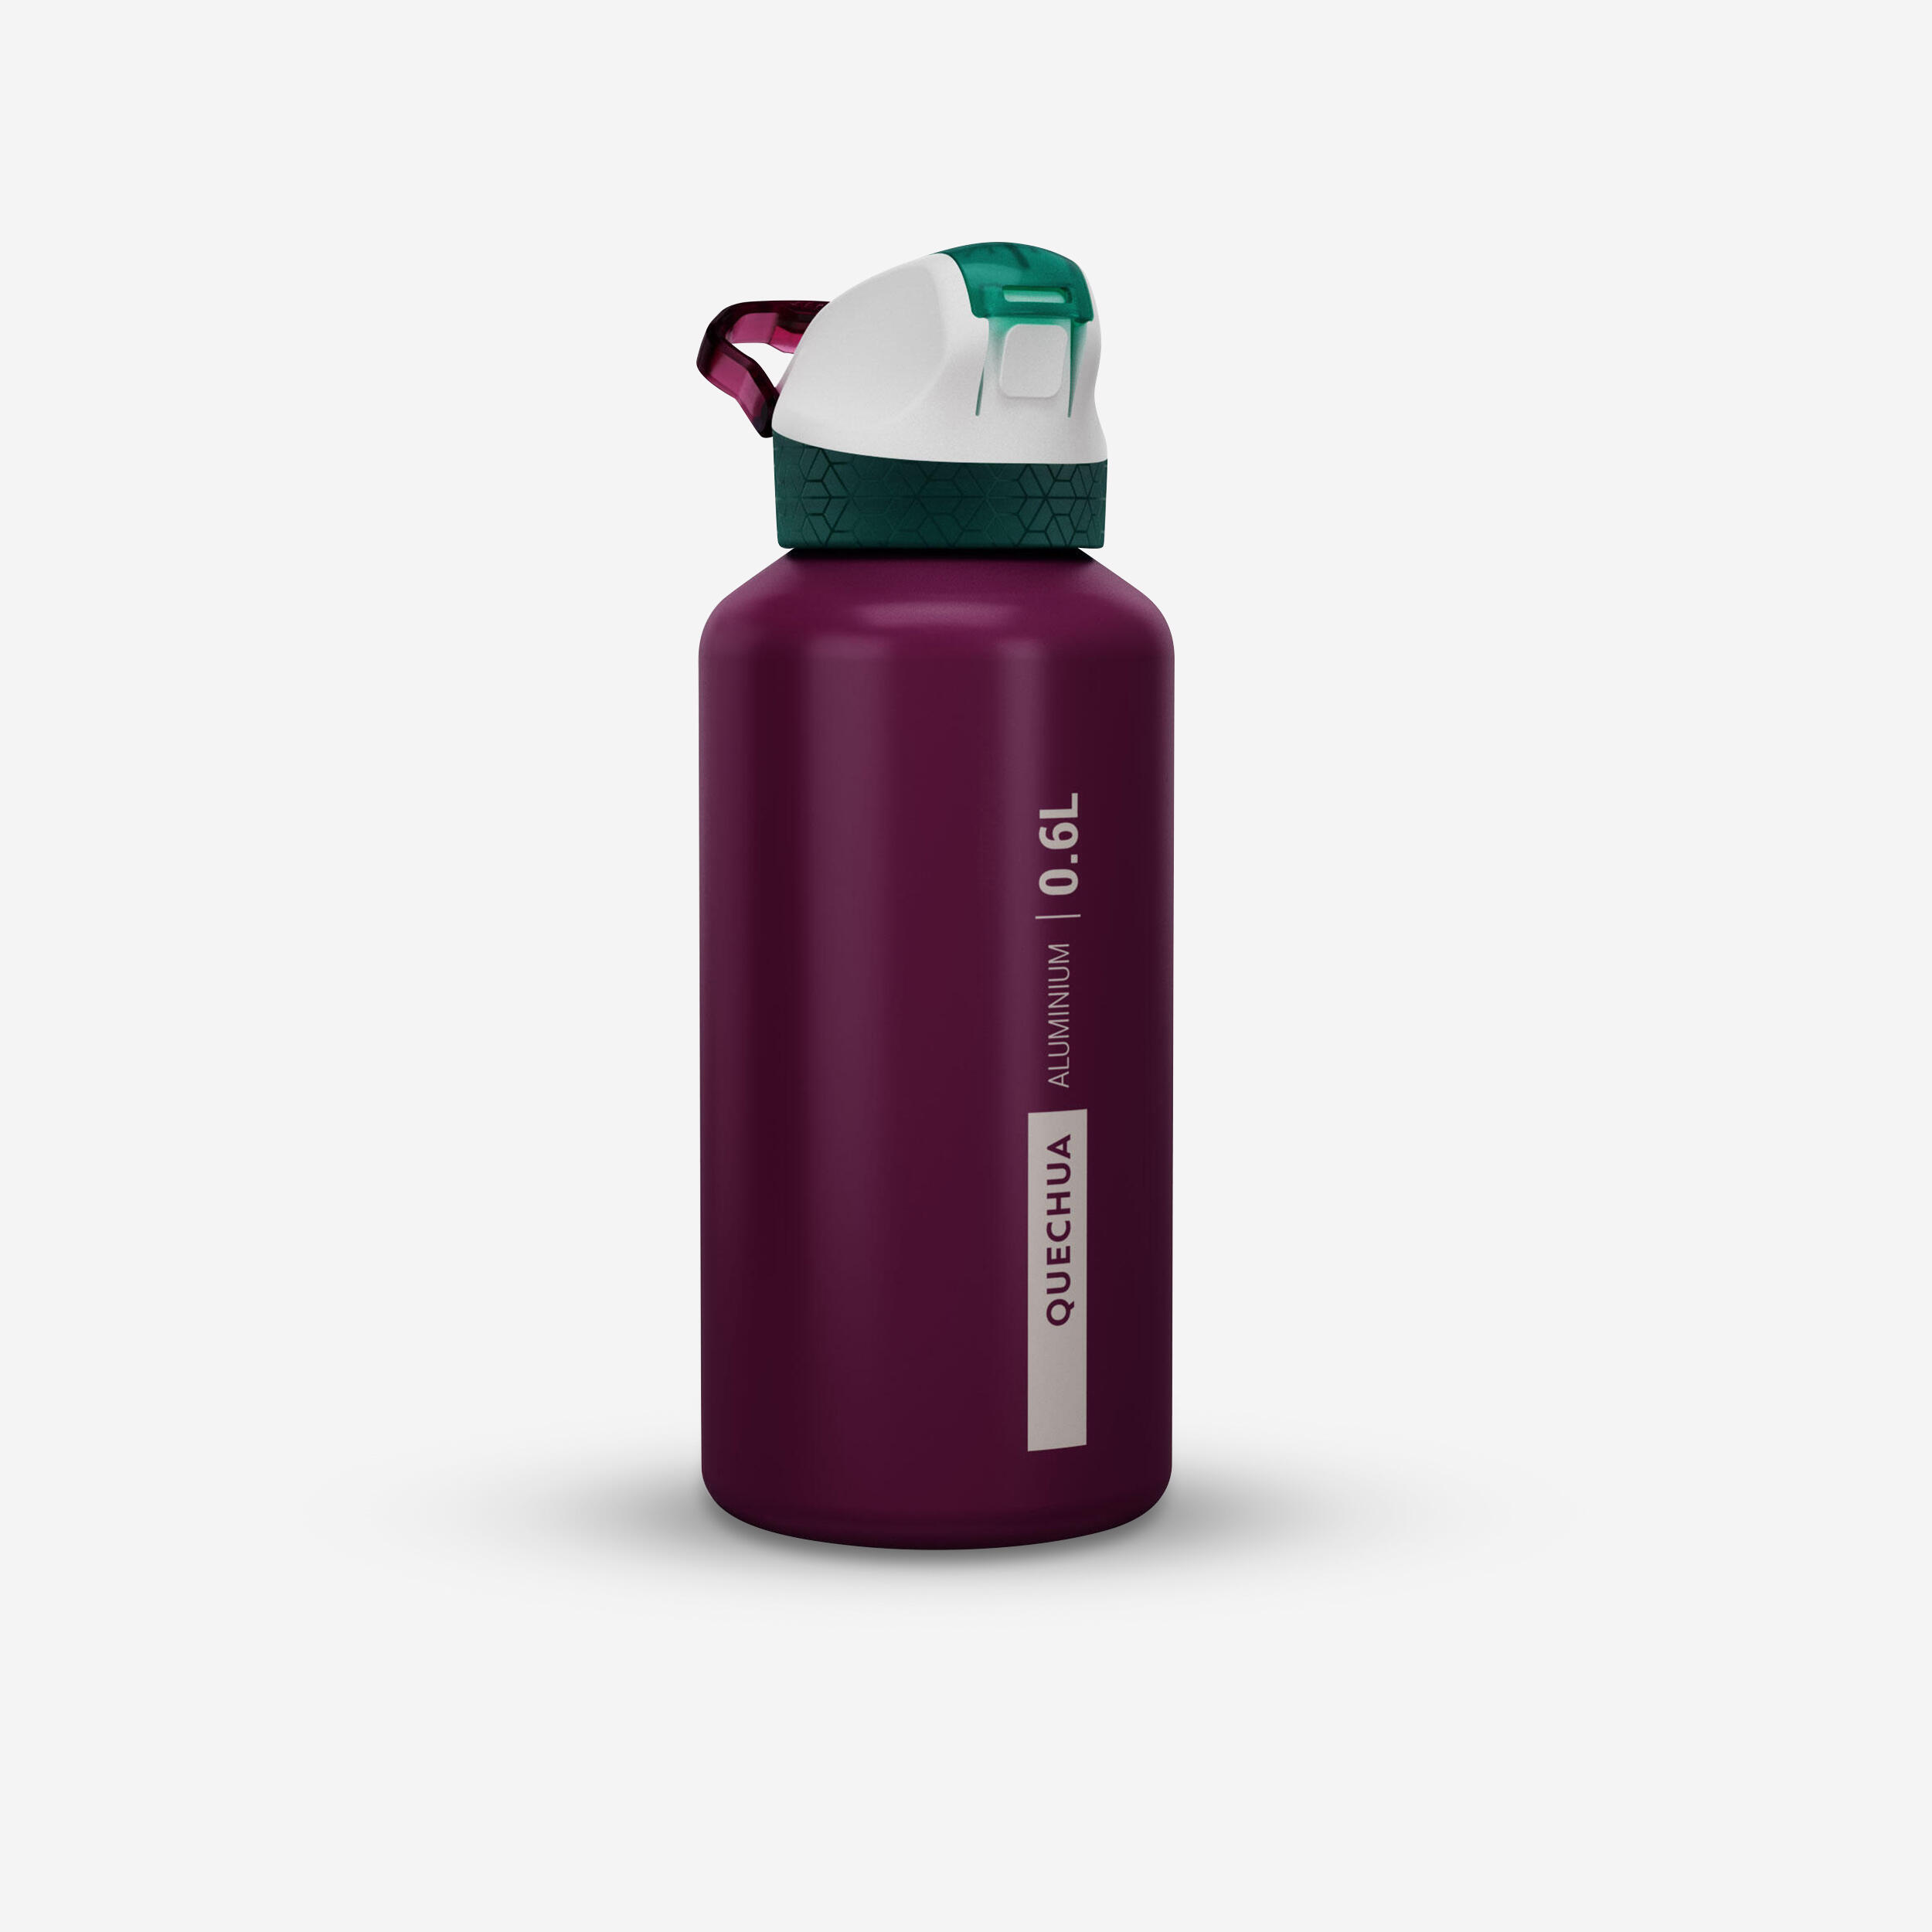 Kids 0.6 L aluminium flask with instant-open cap and pipette for hiking 1/12